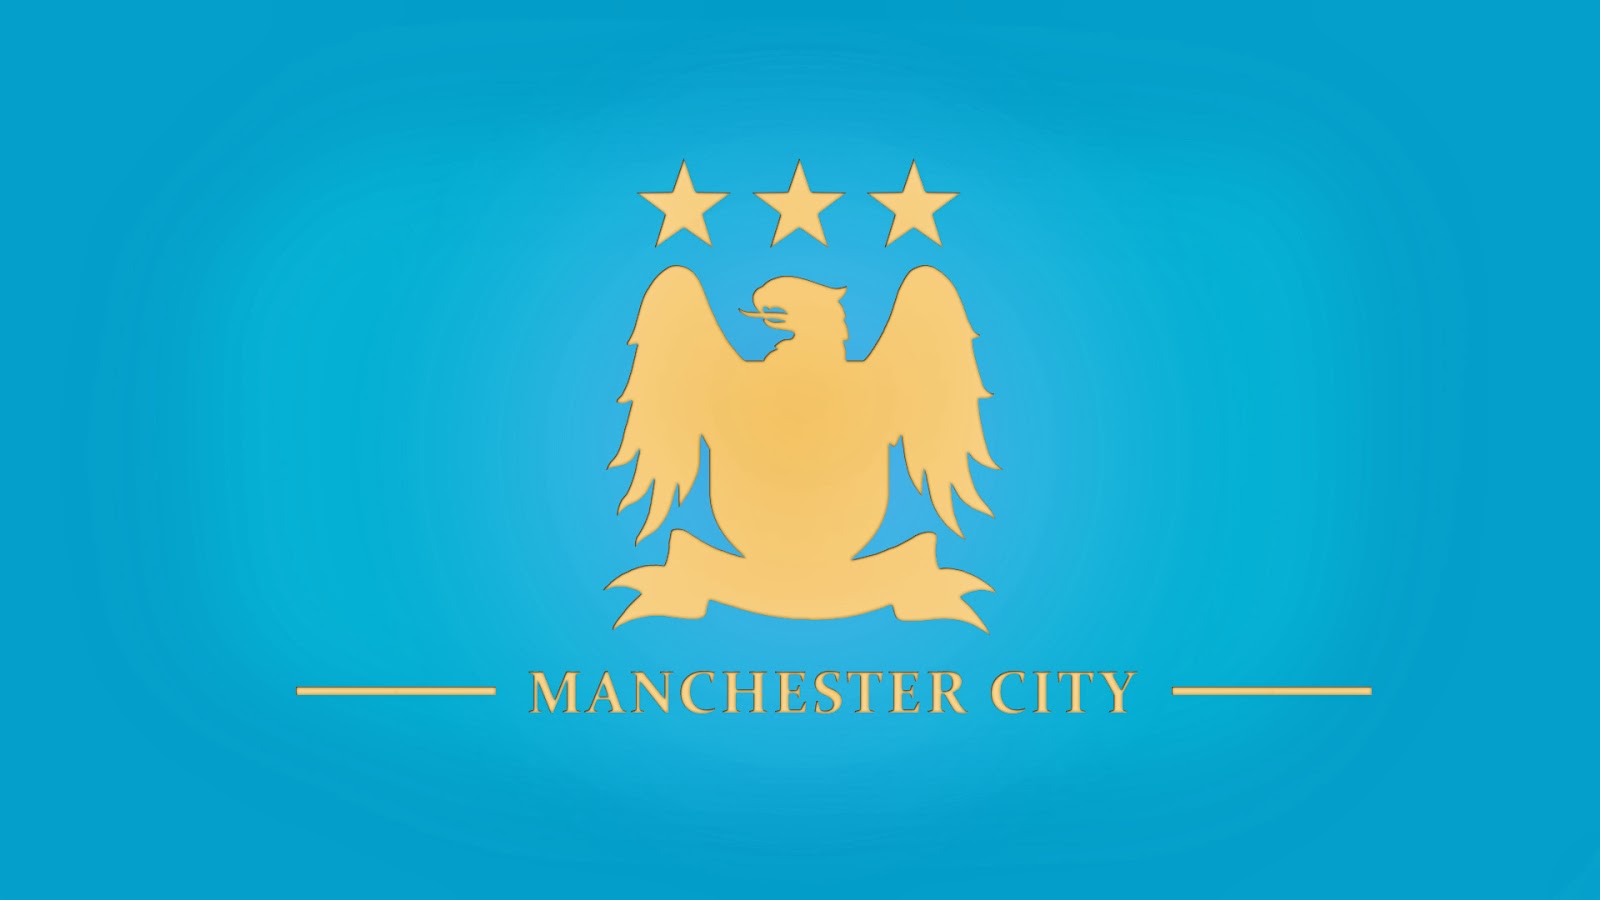 manchester city fc George manchester united legends wallpapers legend 10wallpaper sports simply